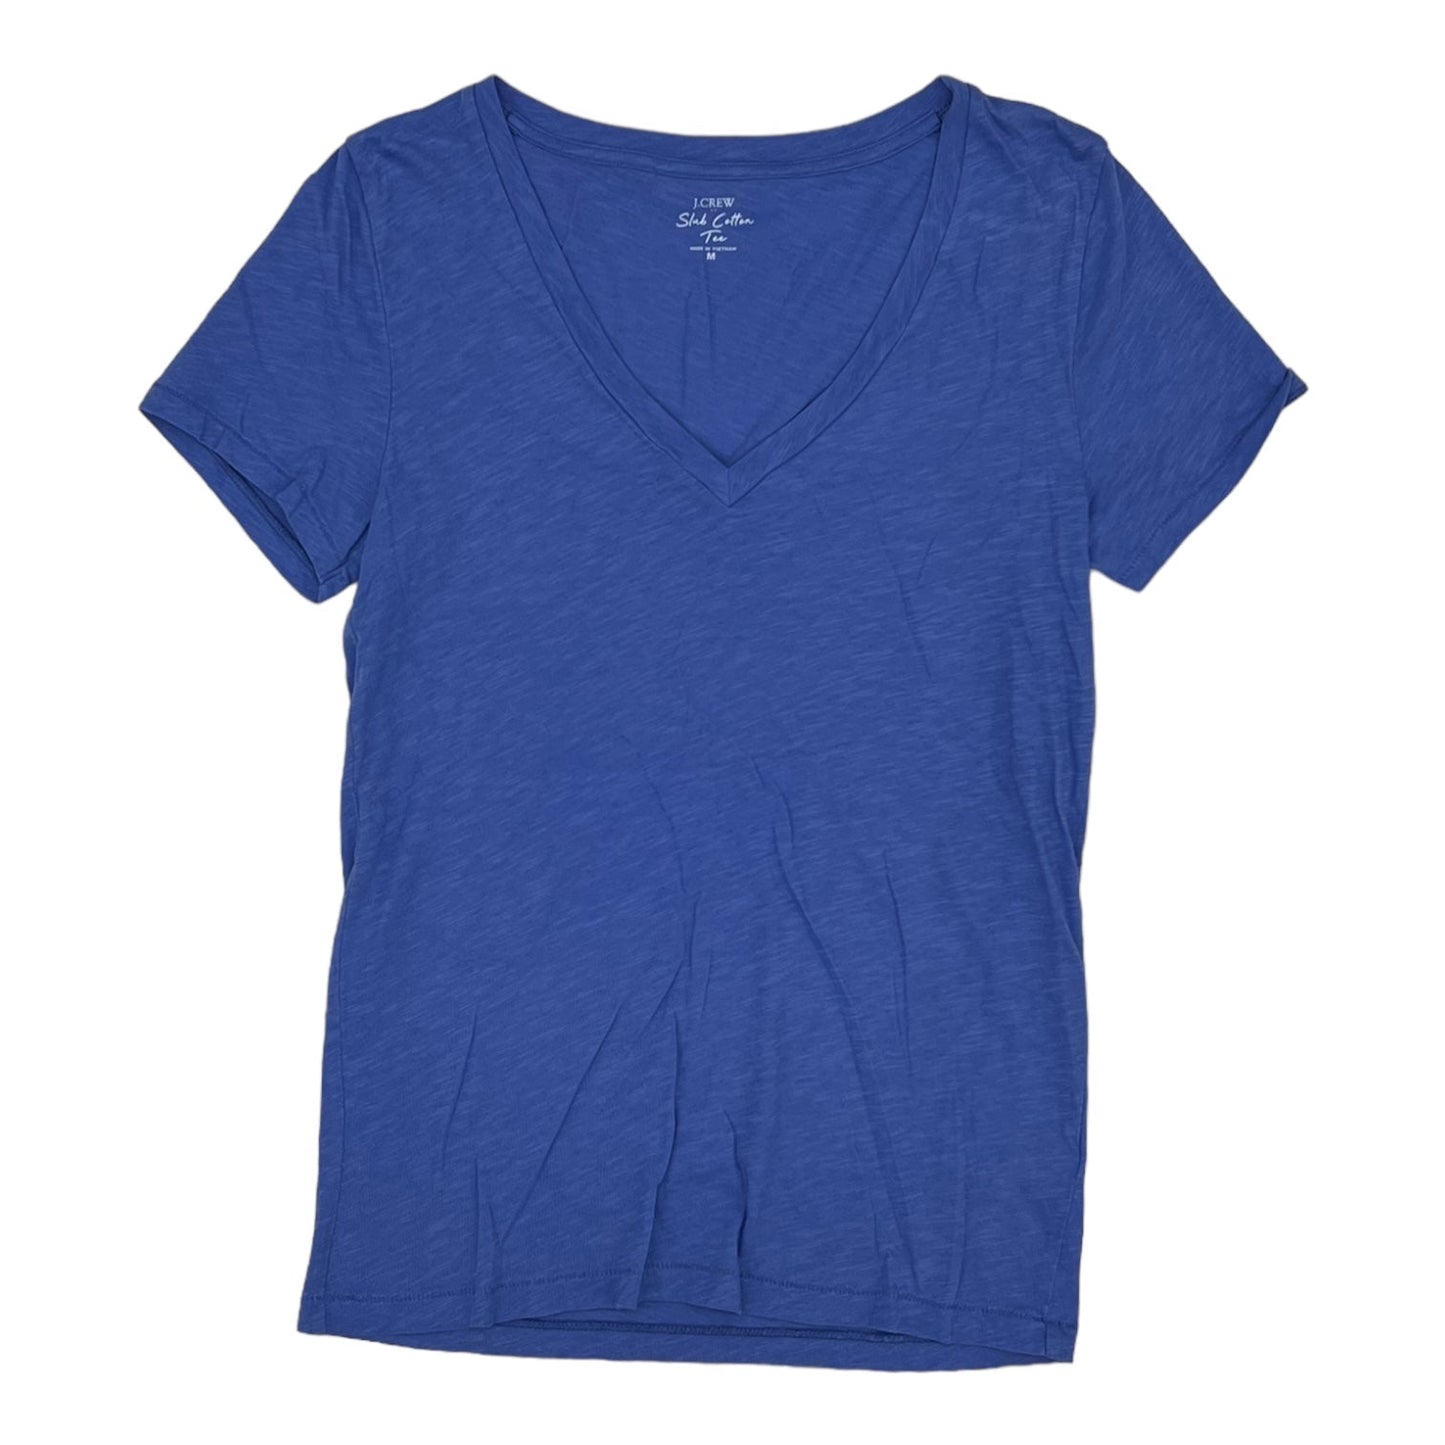 BLUE TOP SS BASIC by J. CREW Size:M